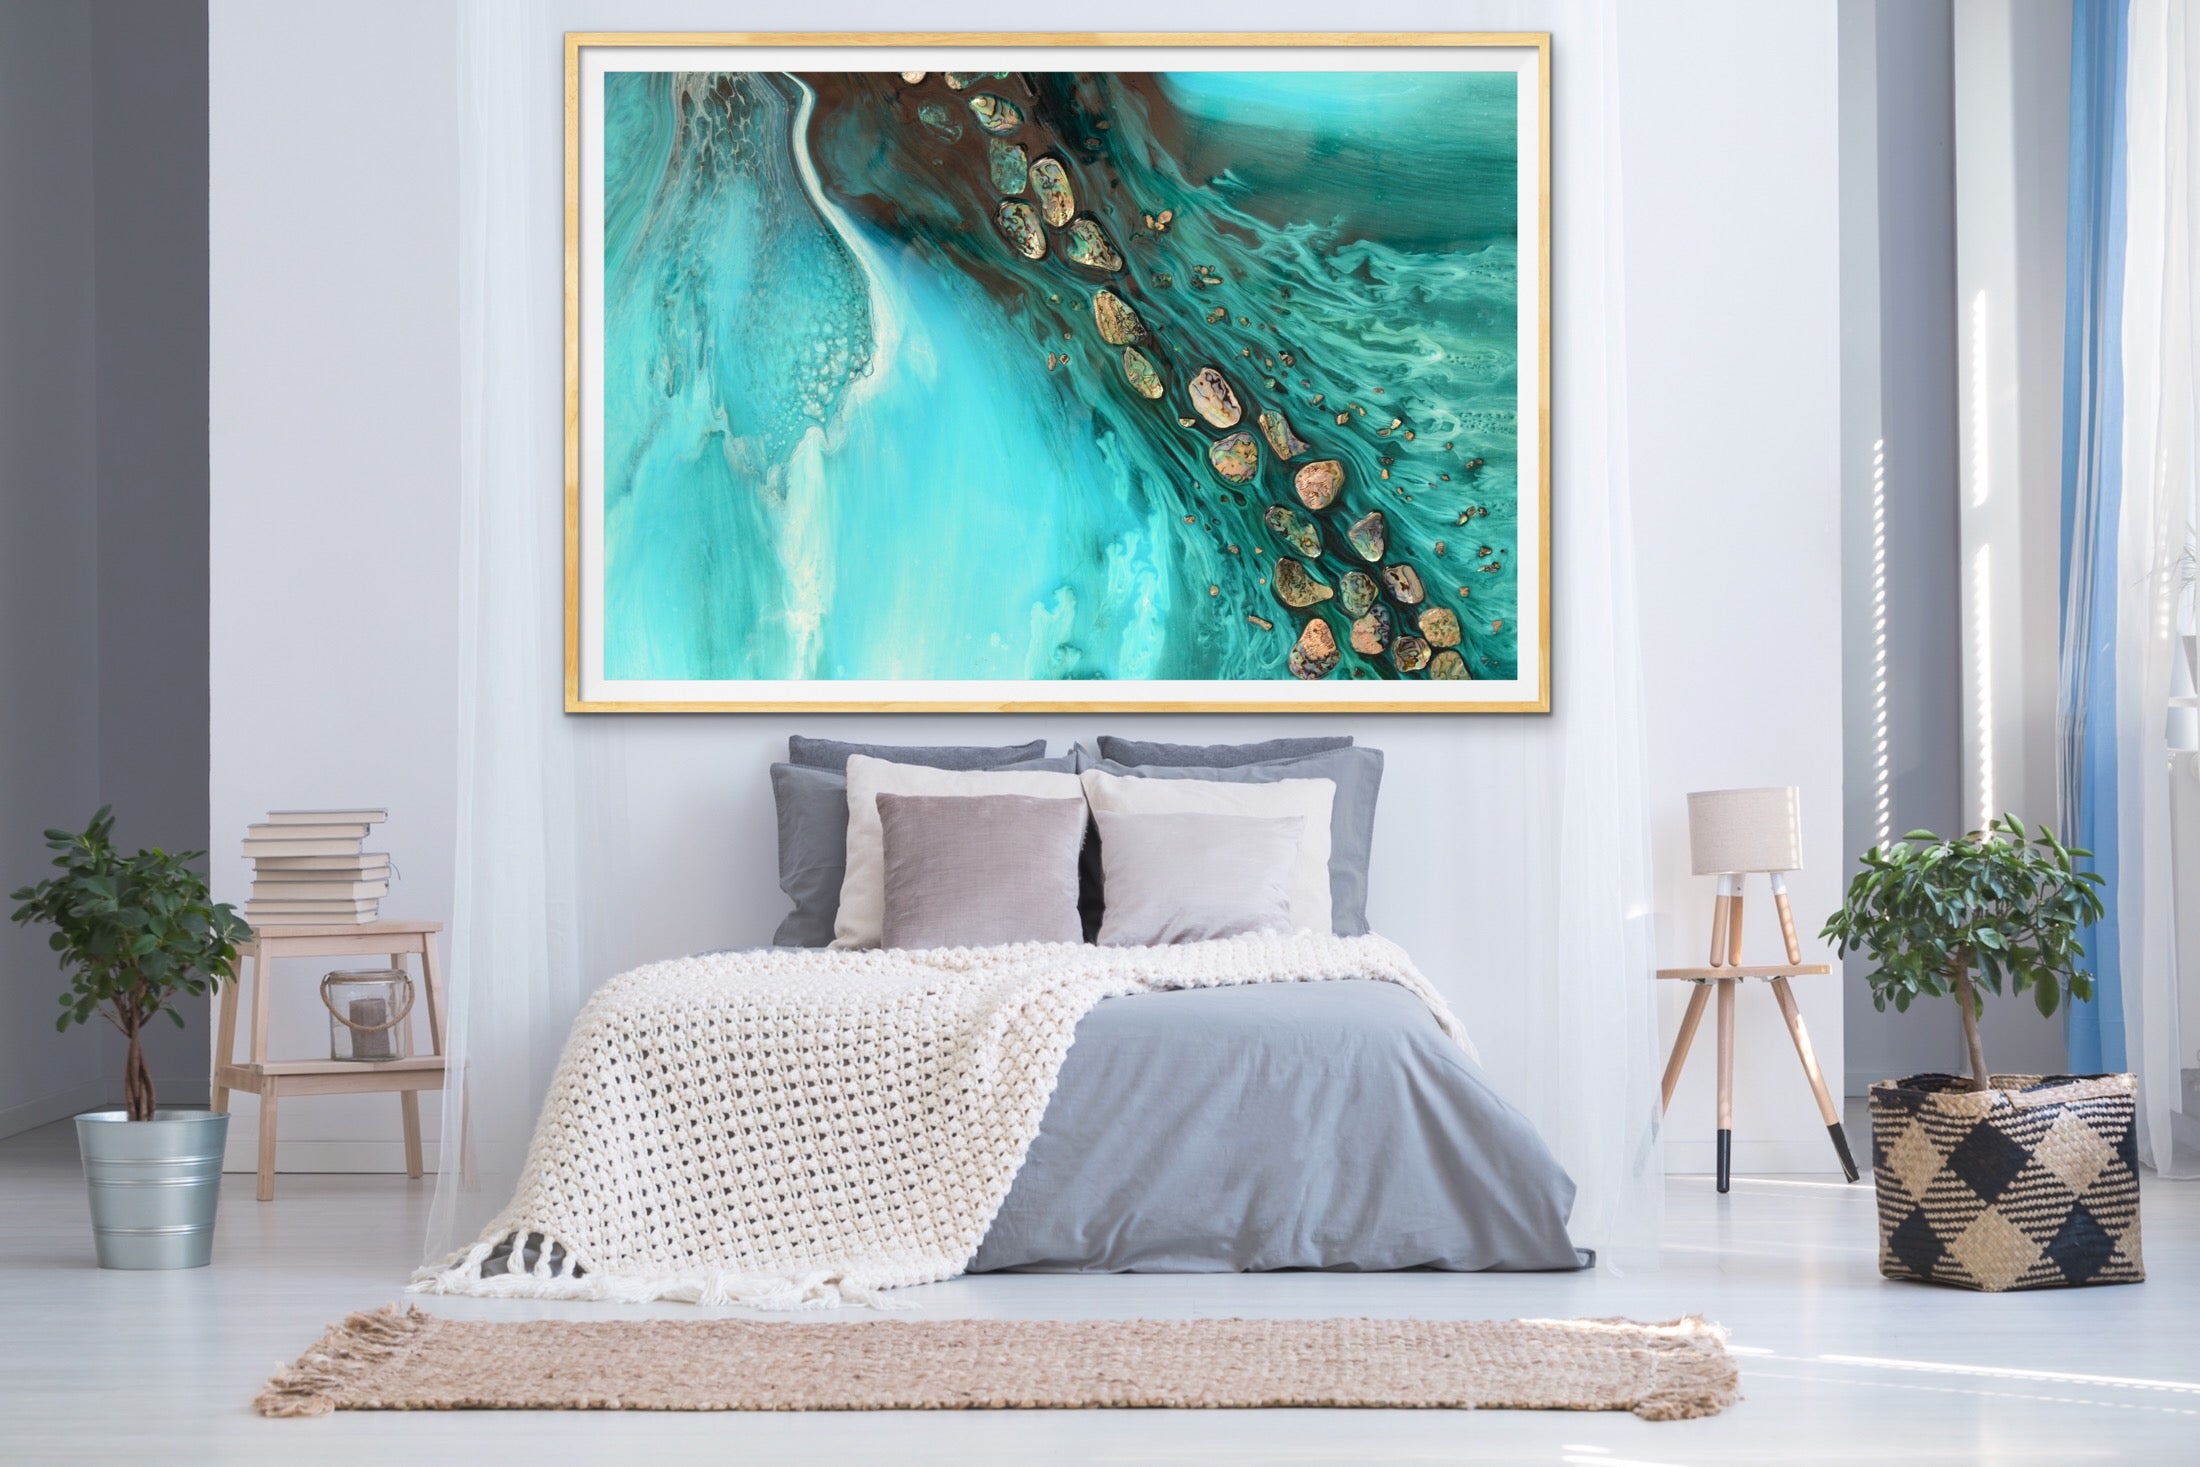 Abstract Ocean. Teal & Aqua. Rise Above Tide 3. Art Print. Antuanelle 2 Artwork. Limited Edition Print